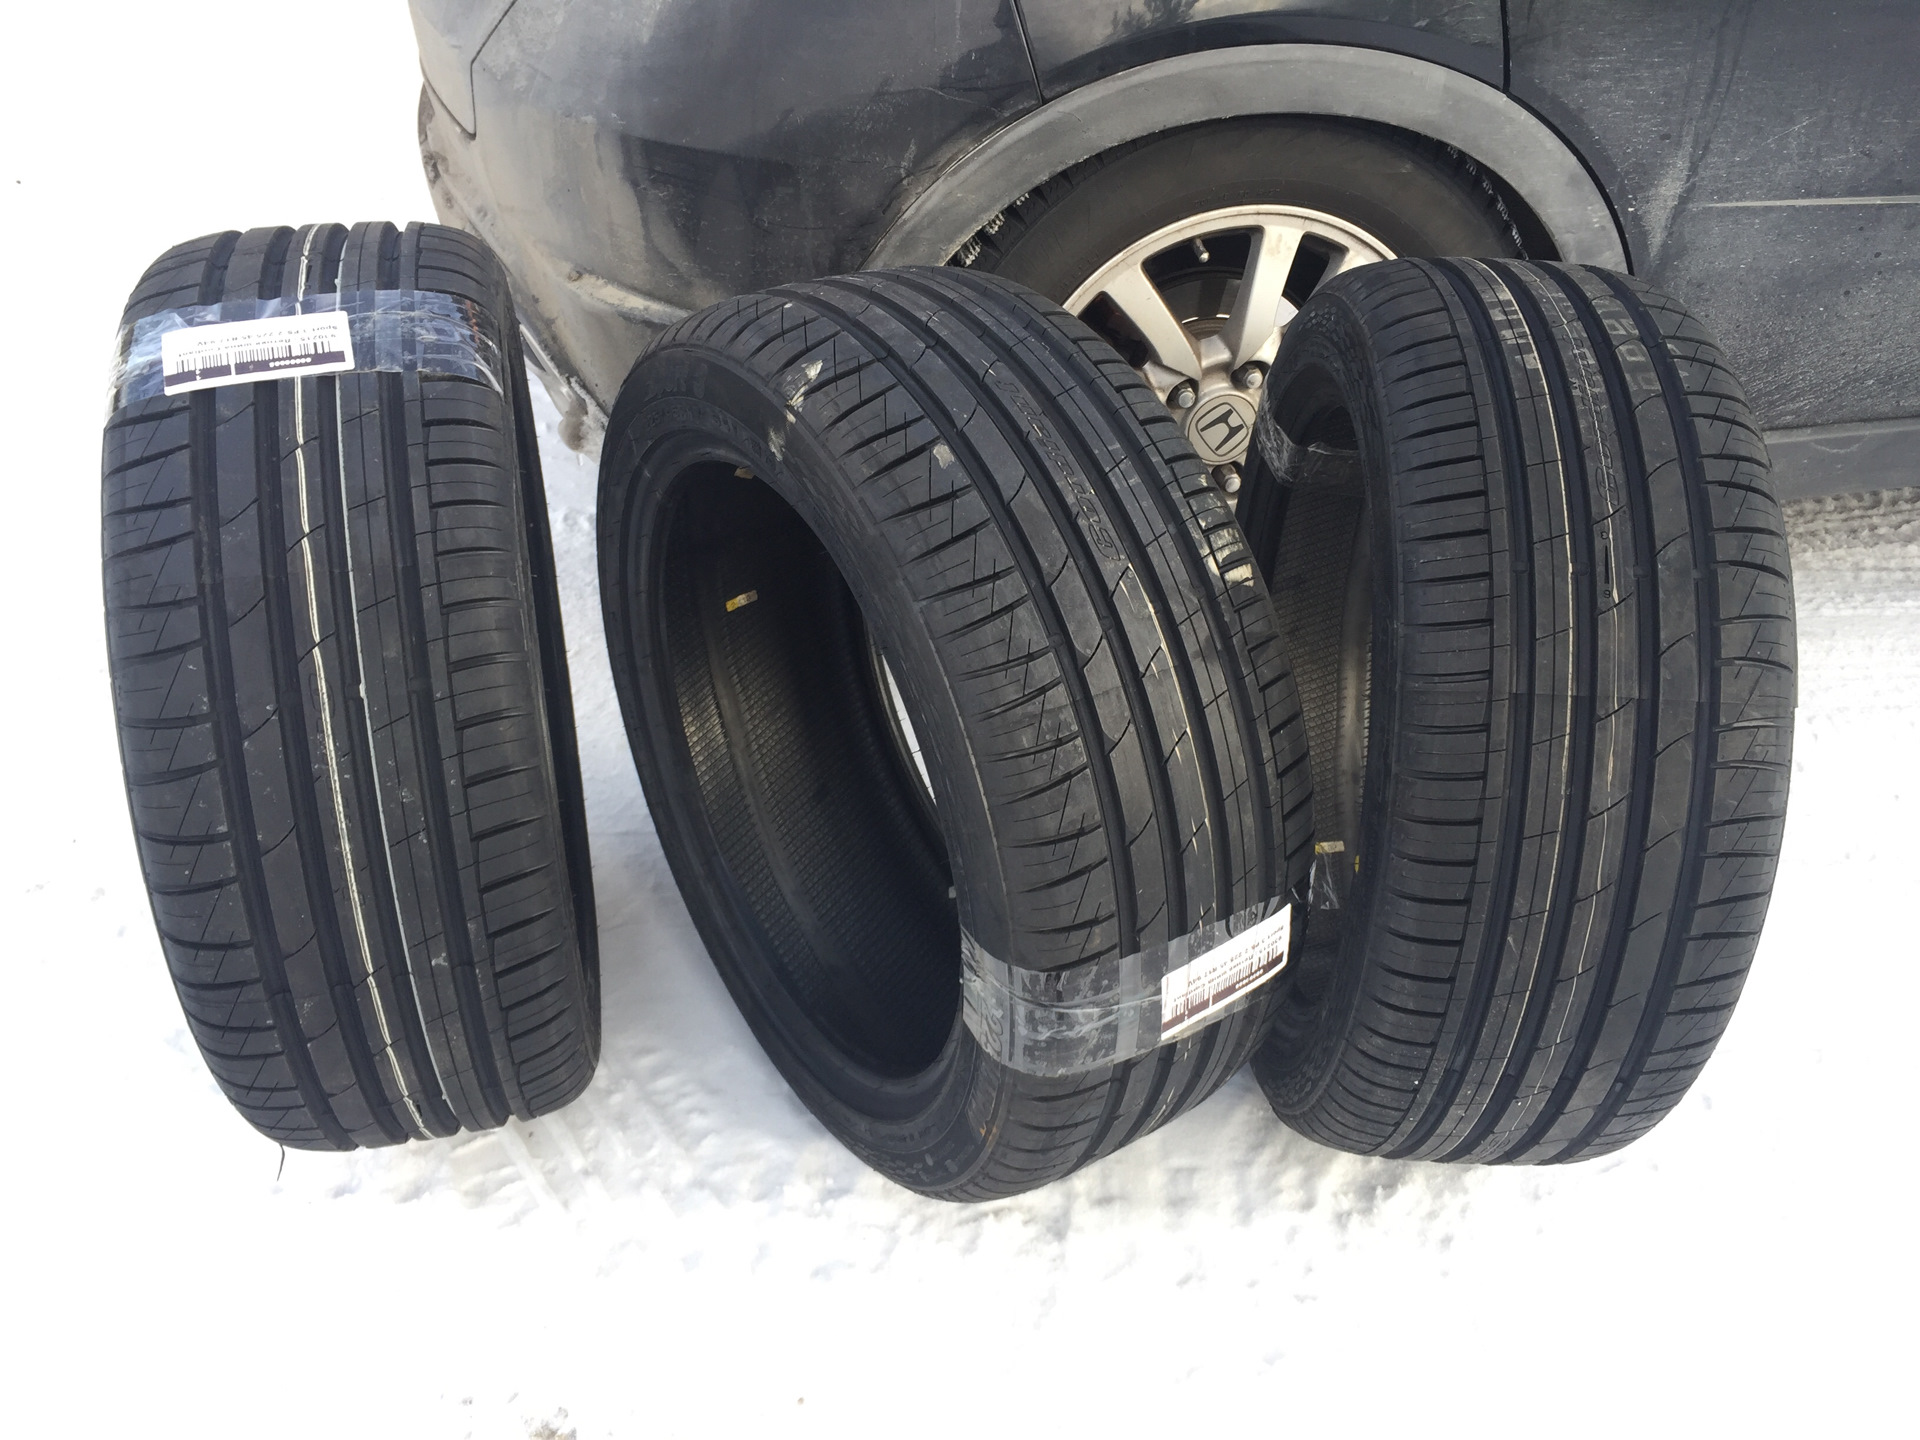 Шина cordiant sport 3 ps2. Cordiant Sport 3 225/45 r17. Cordiant Sport 3 225/45r17 94v. Cordiant Sport 3 ps2 225/50 r17. Cordiant Sport 3 ps2 r17 225/45 94v.